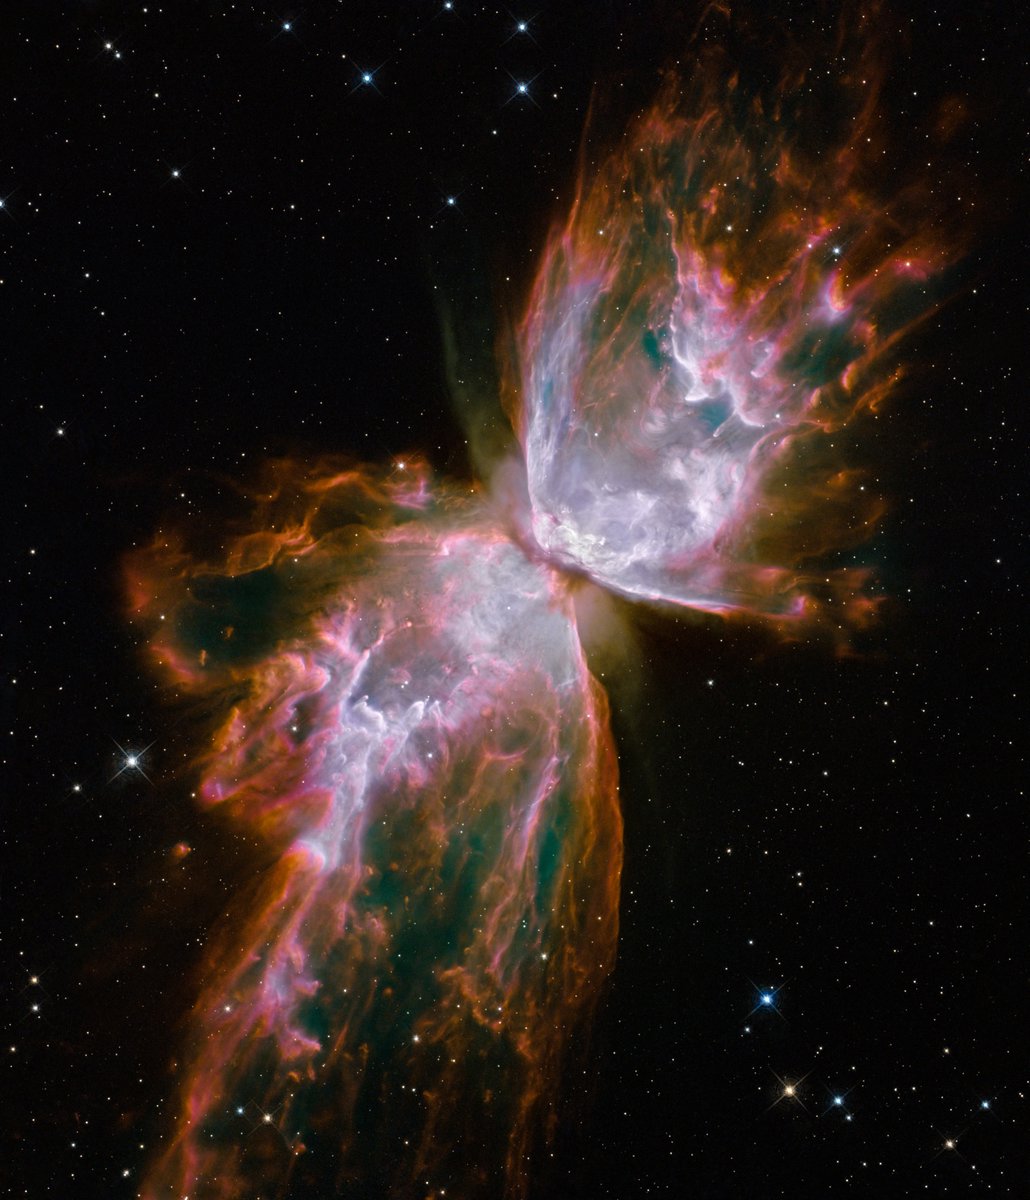 The "Butterfly Nebula" NGC 6302 is only about 3,800 light years from Earth. The dark band of dust at the center hides a star that has ejected its outer layers. From wingtip-to-wingtip the nebula is over two light years across.  #Hubble30Image: NASA, ESA, Hubble SM4 ERO Team